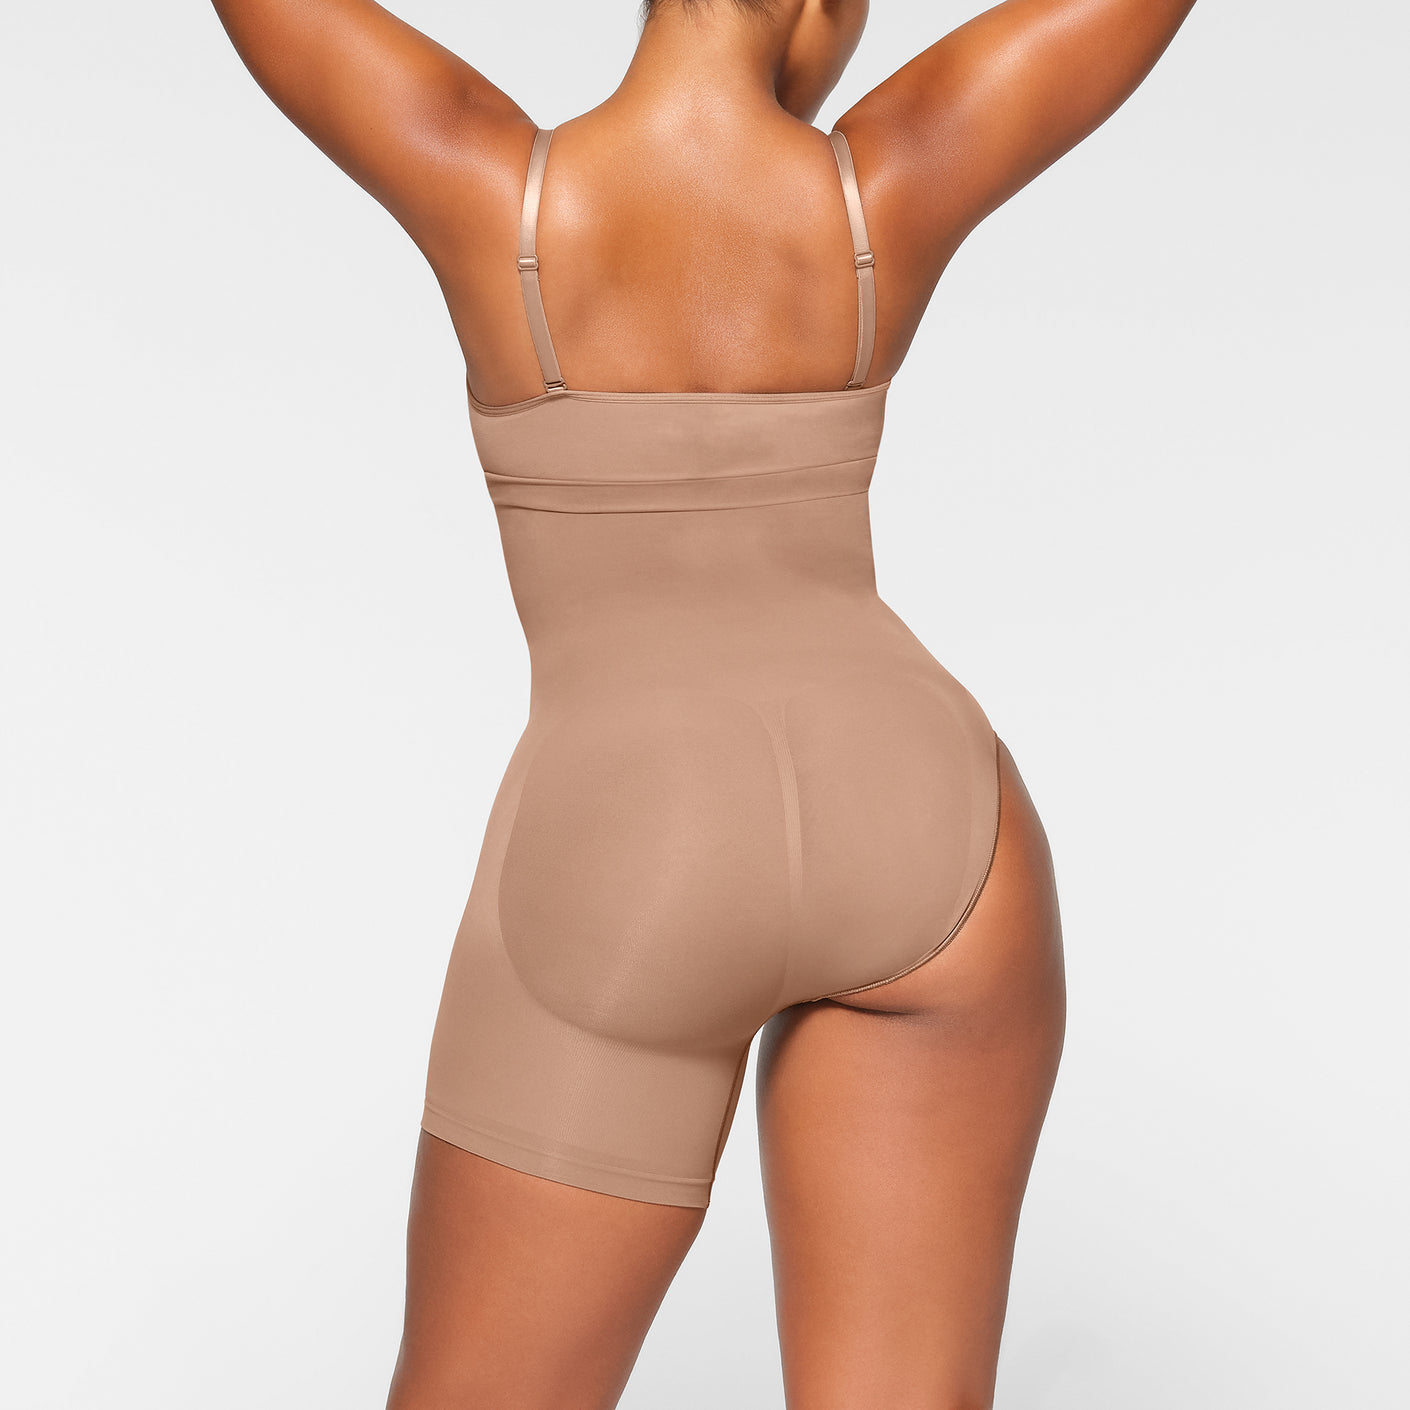 SKIMS - SKIMS Solutionwear — the shapewear that disrupted the